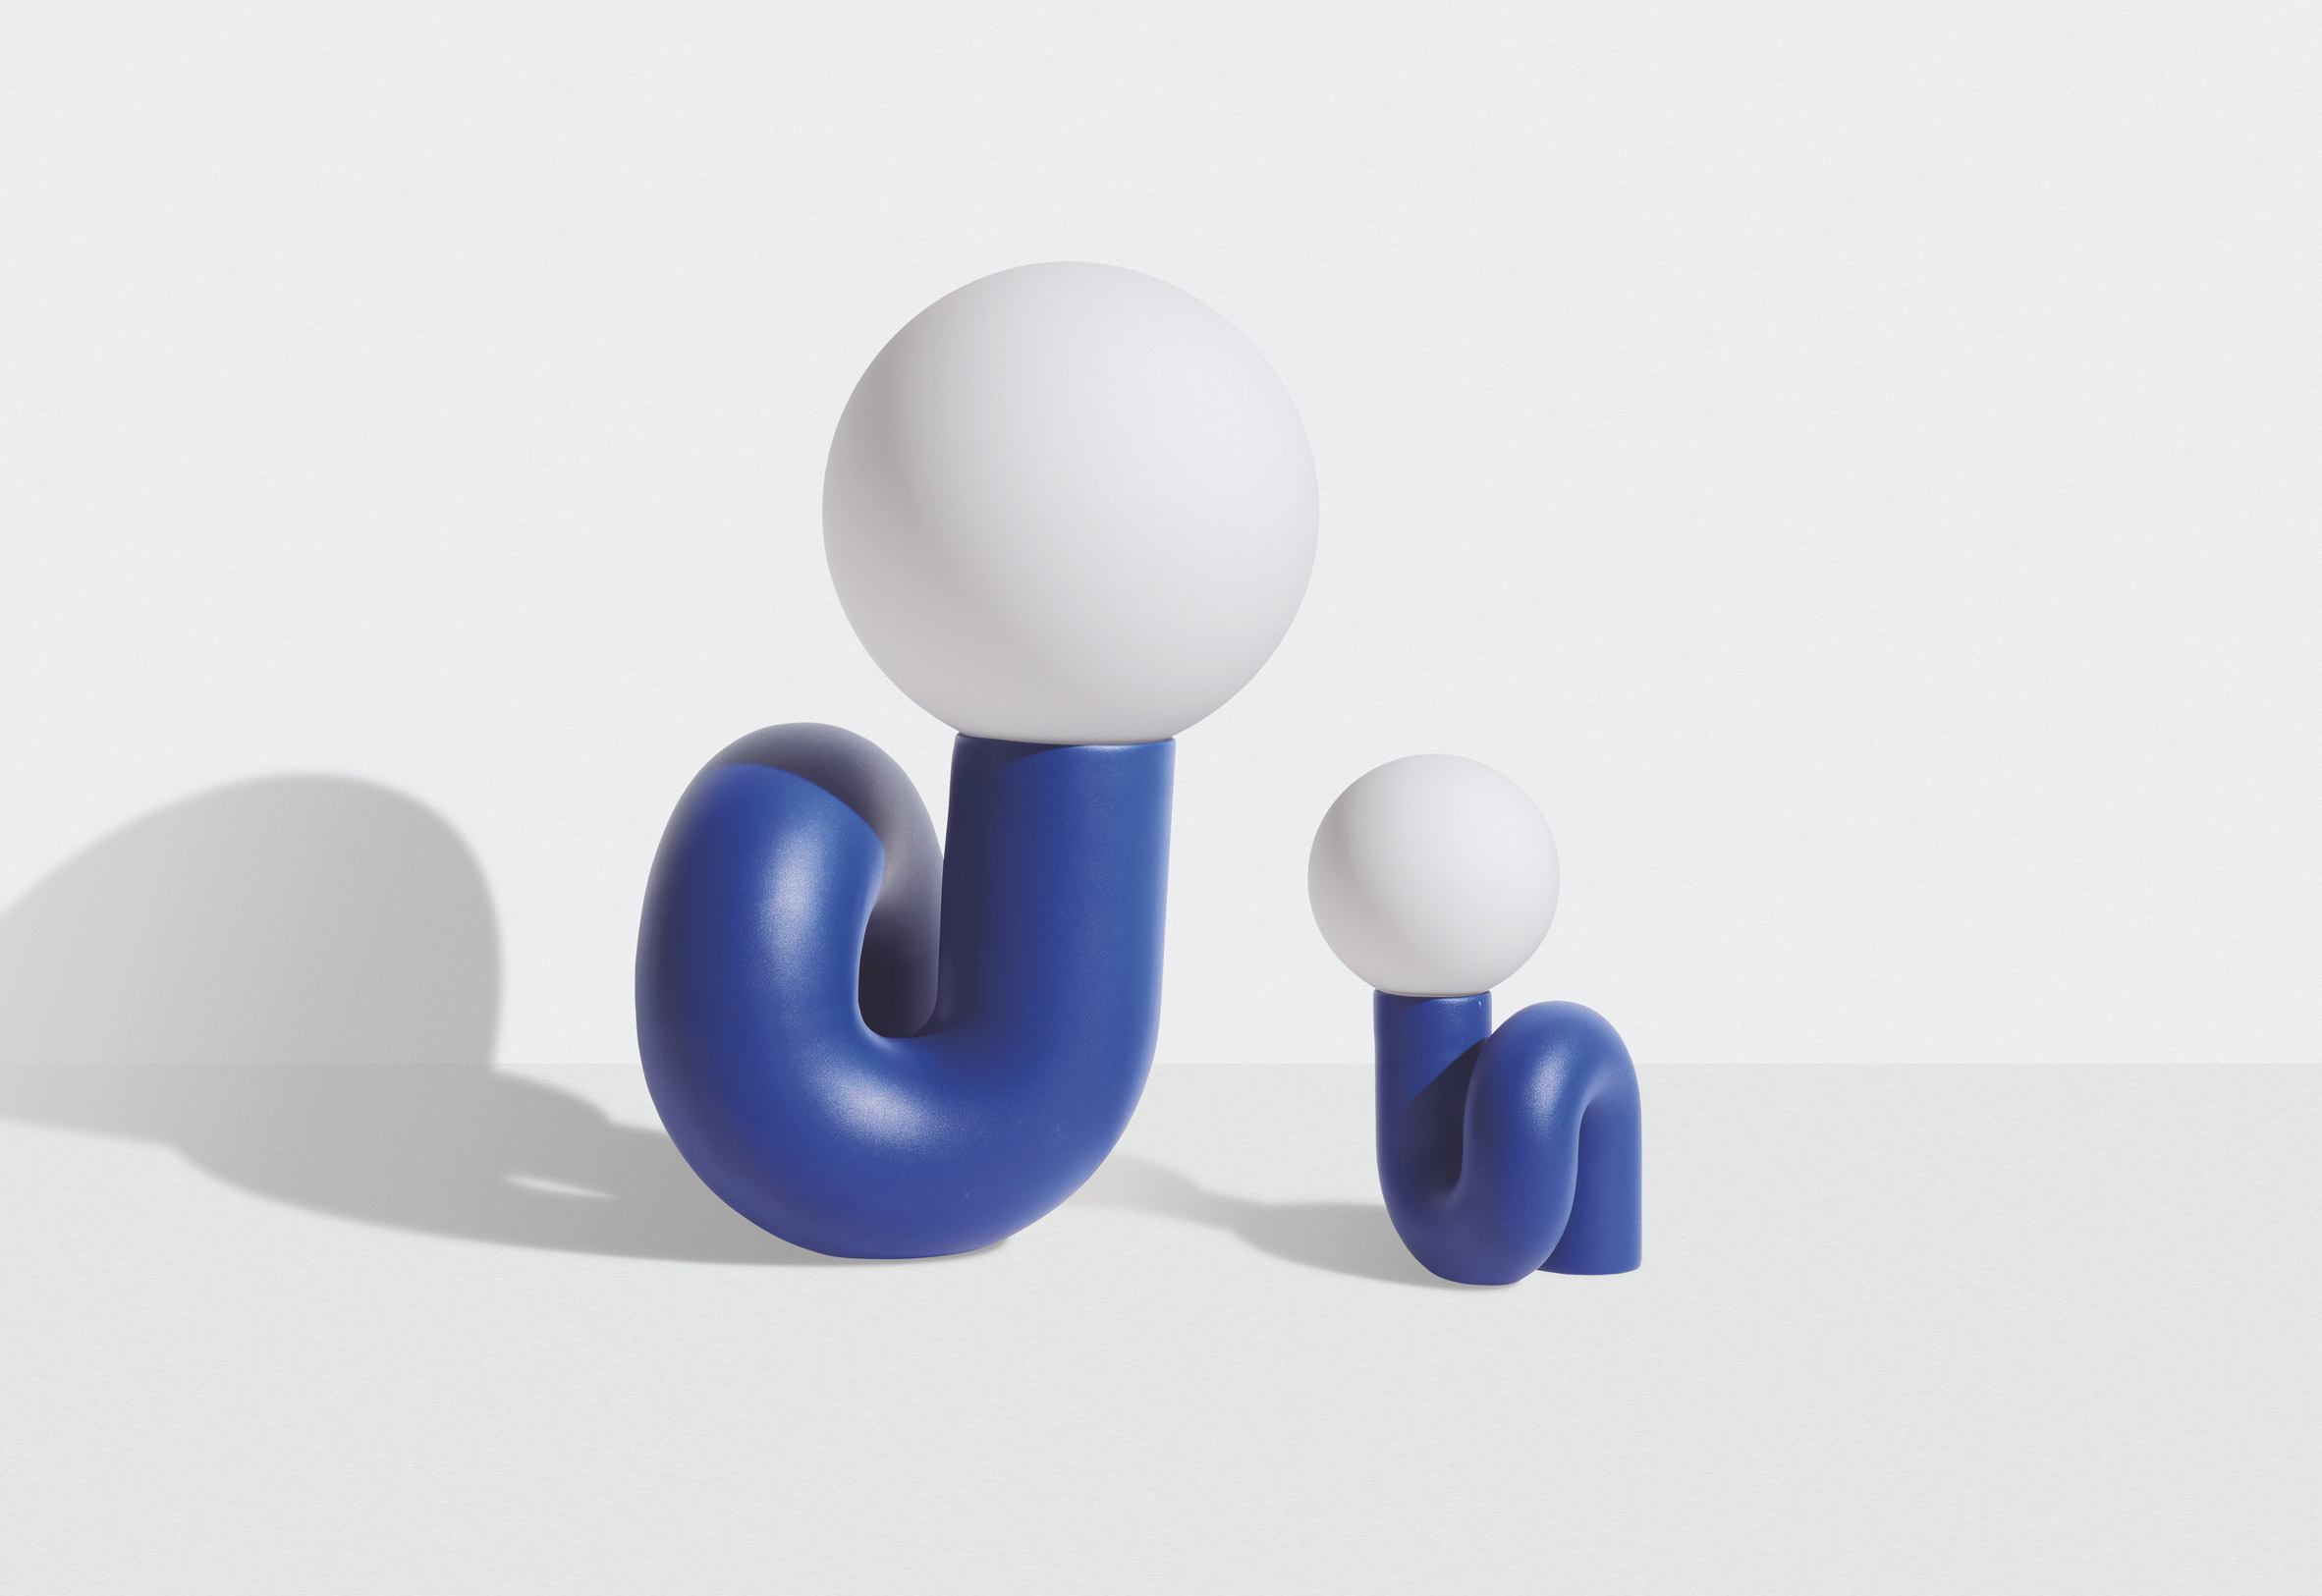 Two blue Neotenic lamps by Jumbo NYC for Petite Friture